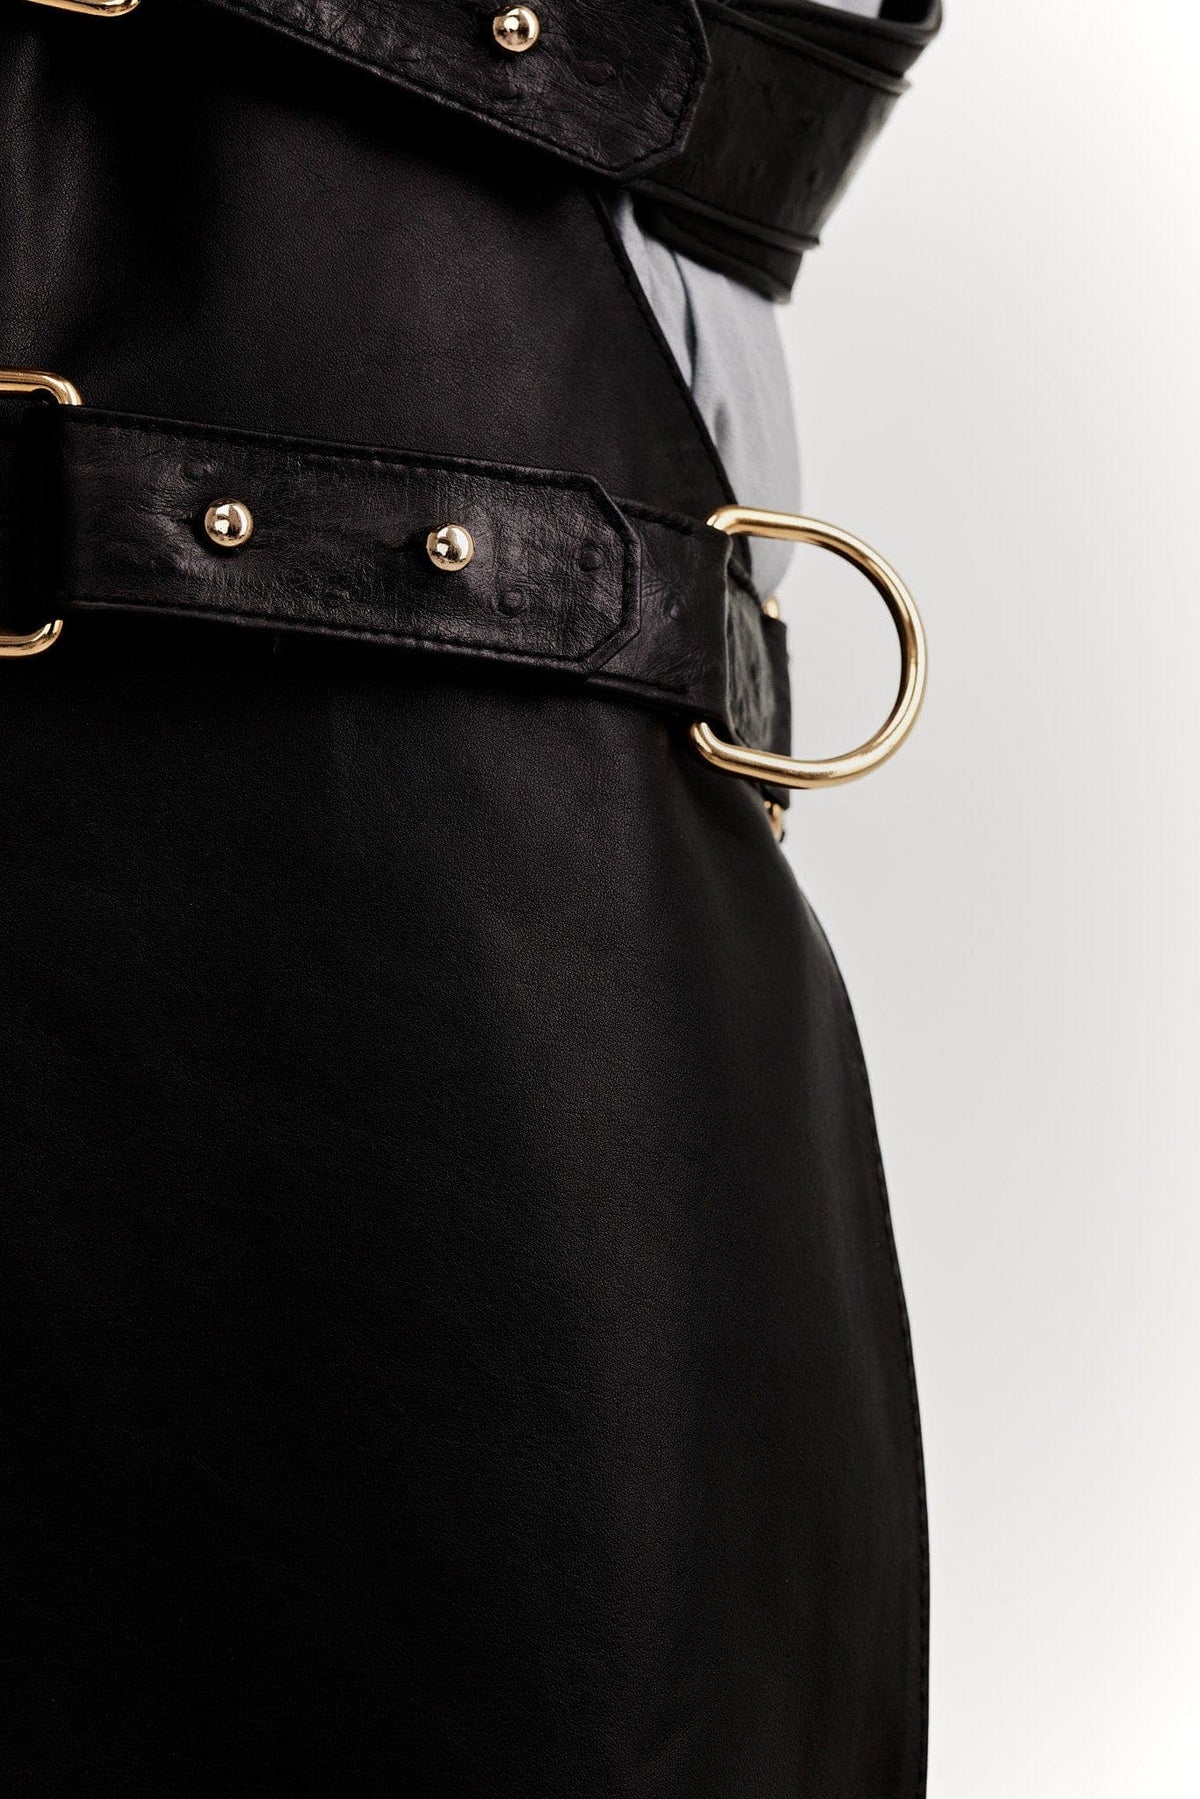 men&#39;s black leather luxury premium apron zoom on the side with D-ring and gold collar buttons